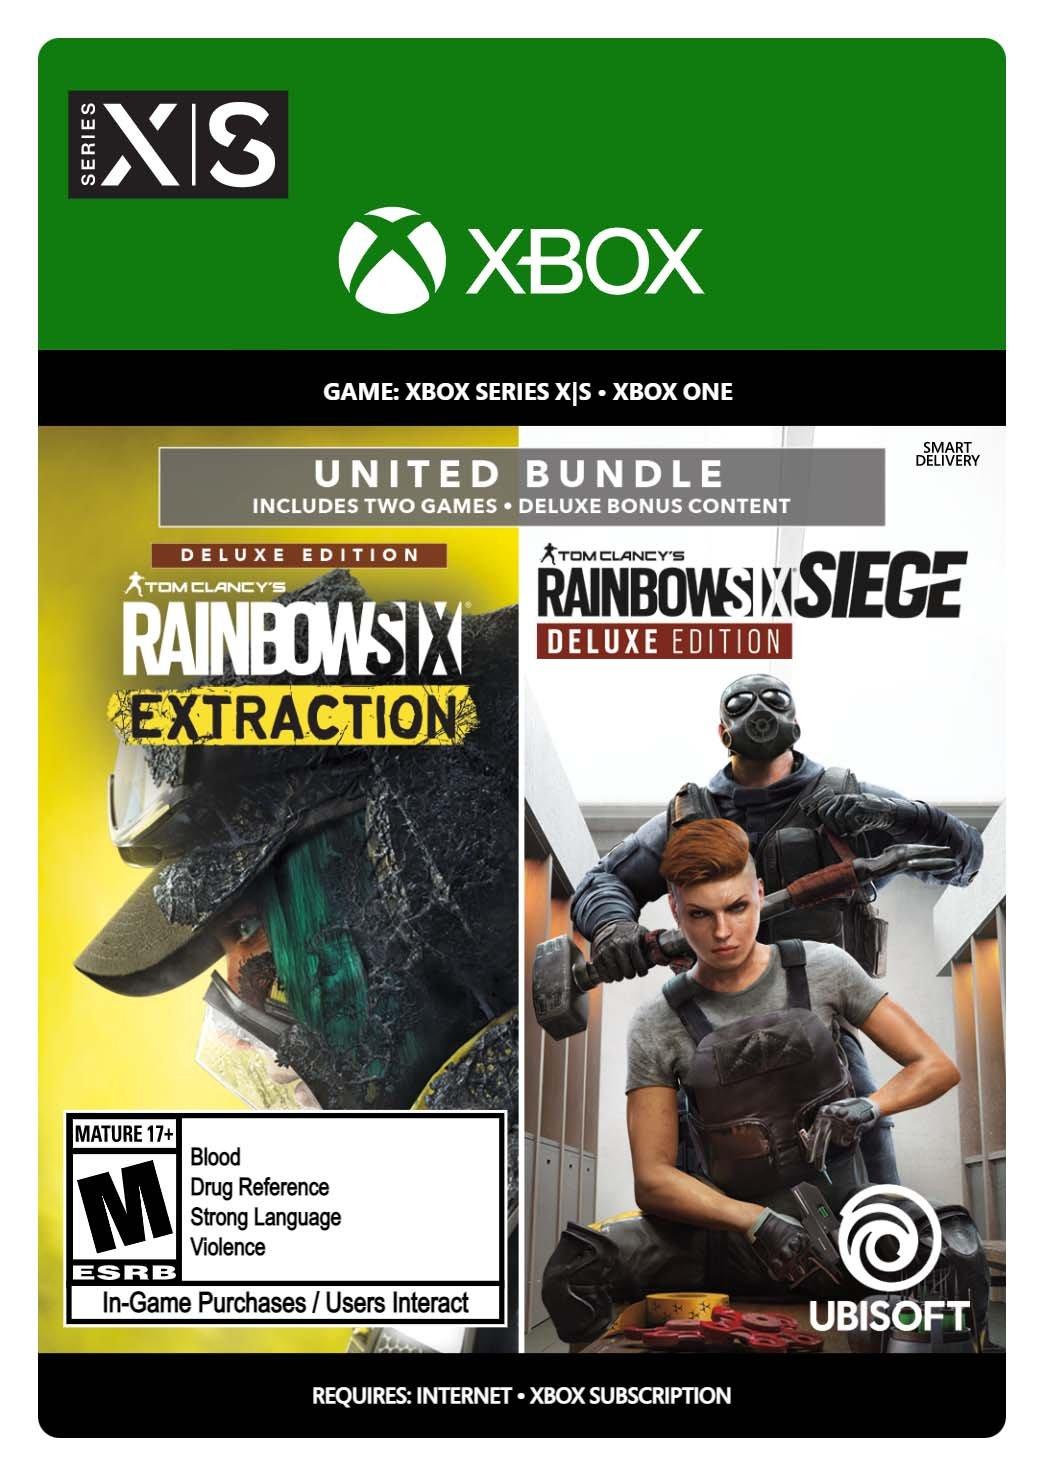 Tom Clancy's Rainbow Six® Siege  Download and Buy Today - Epic